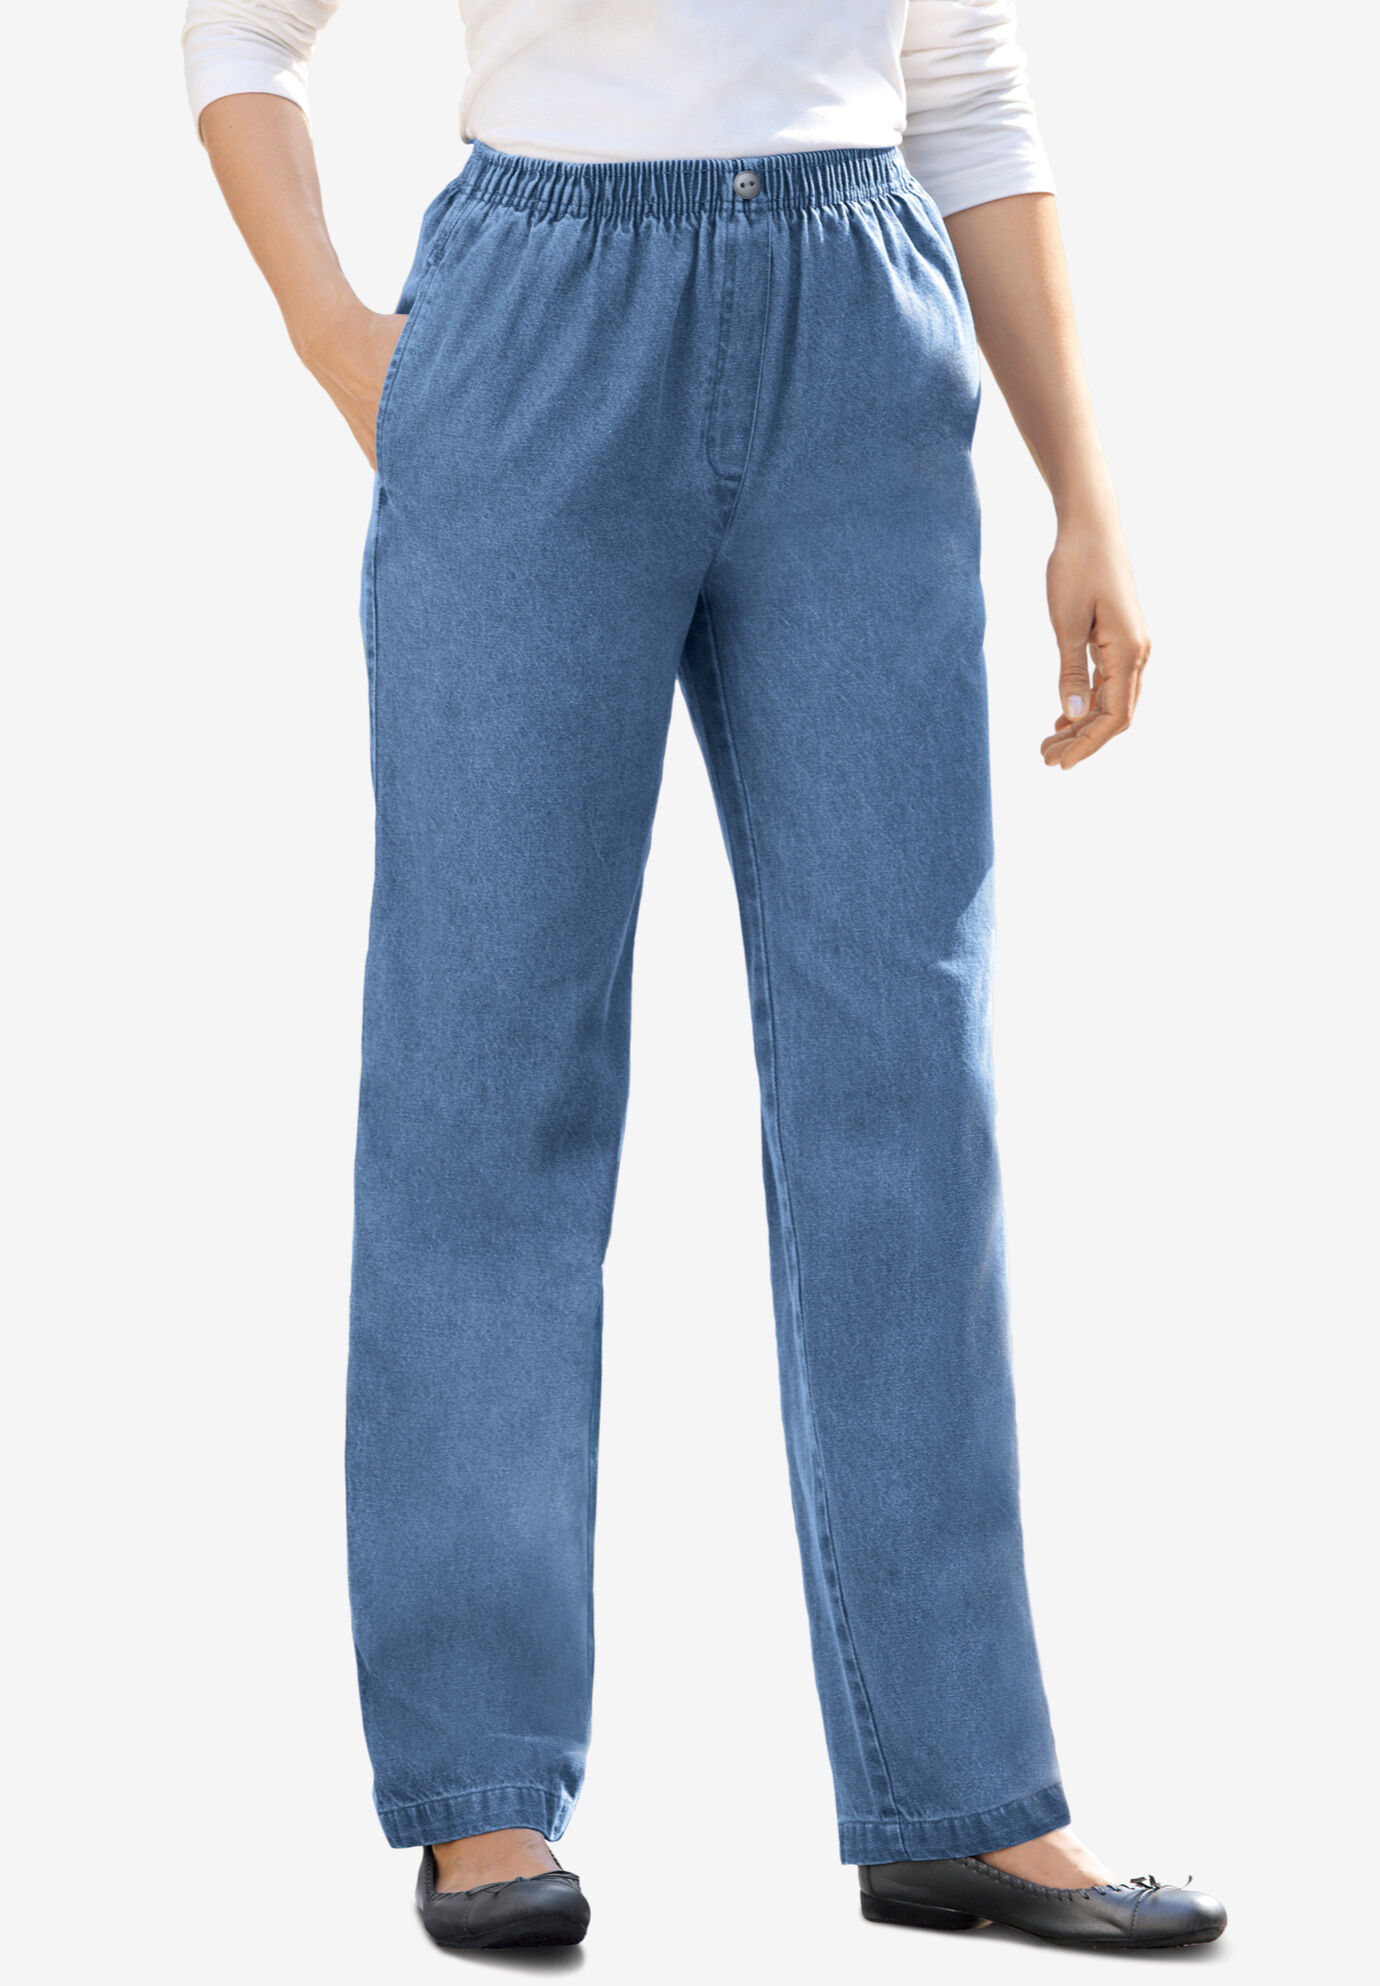 woman within elastic waist jeans